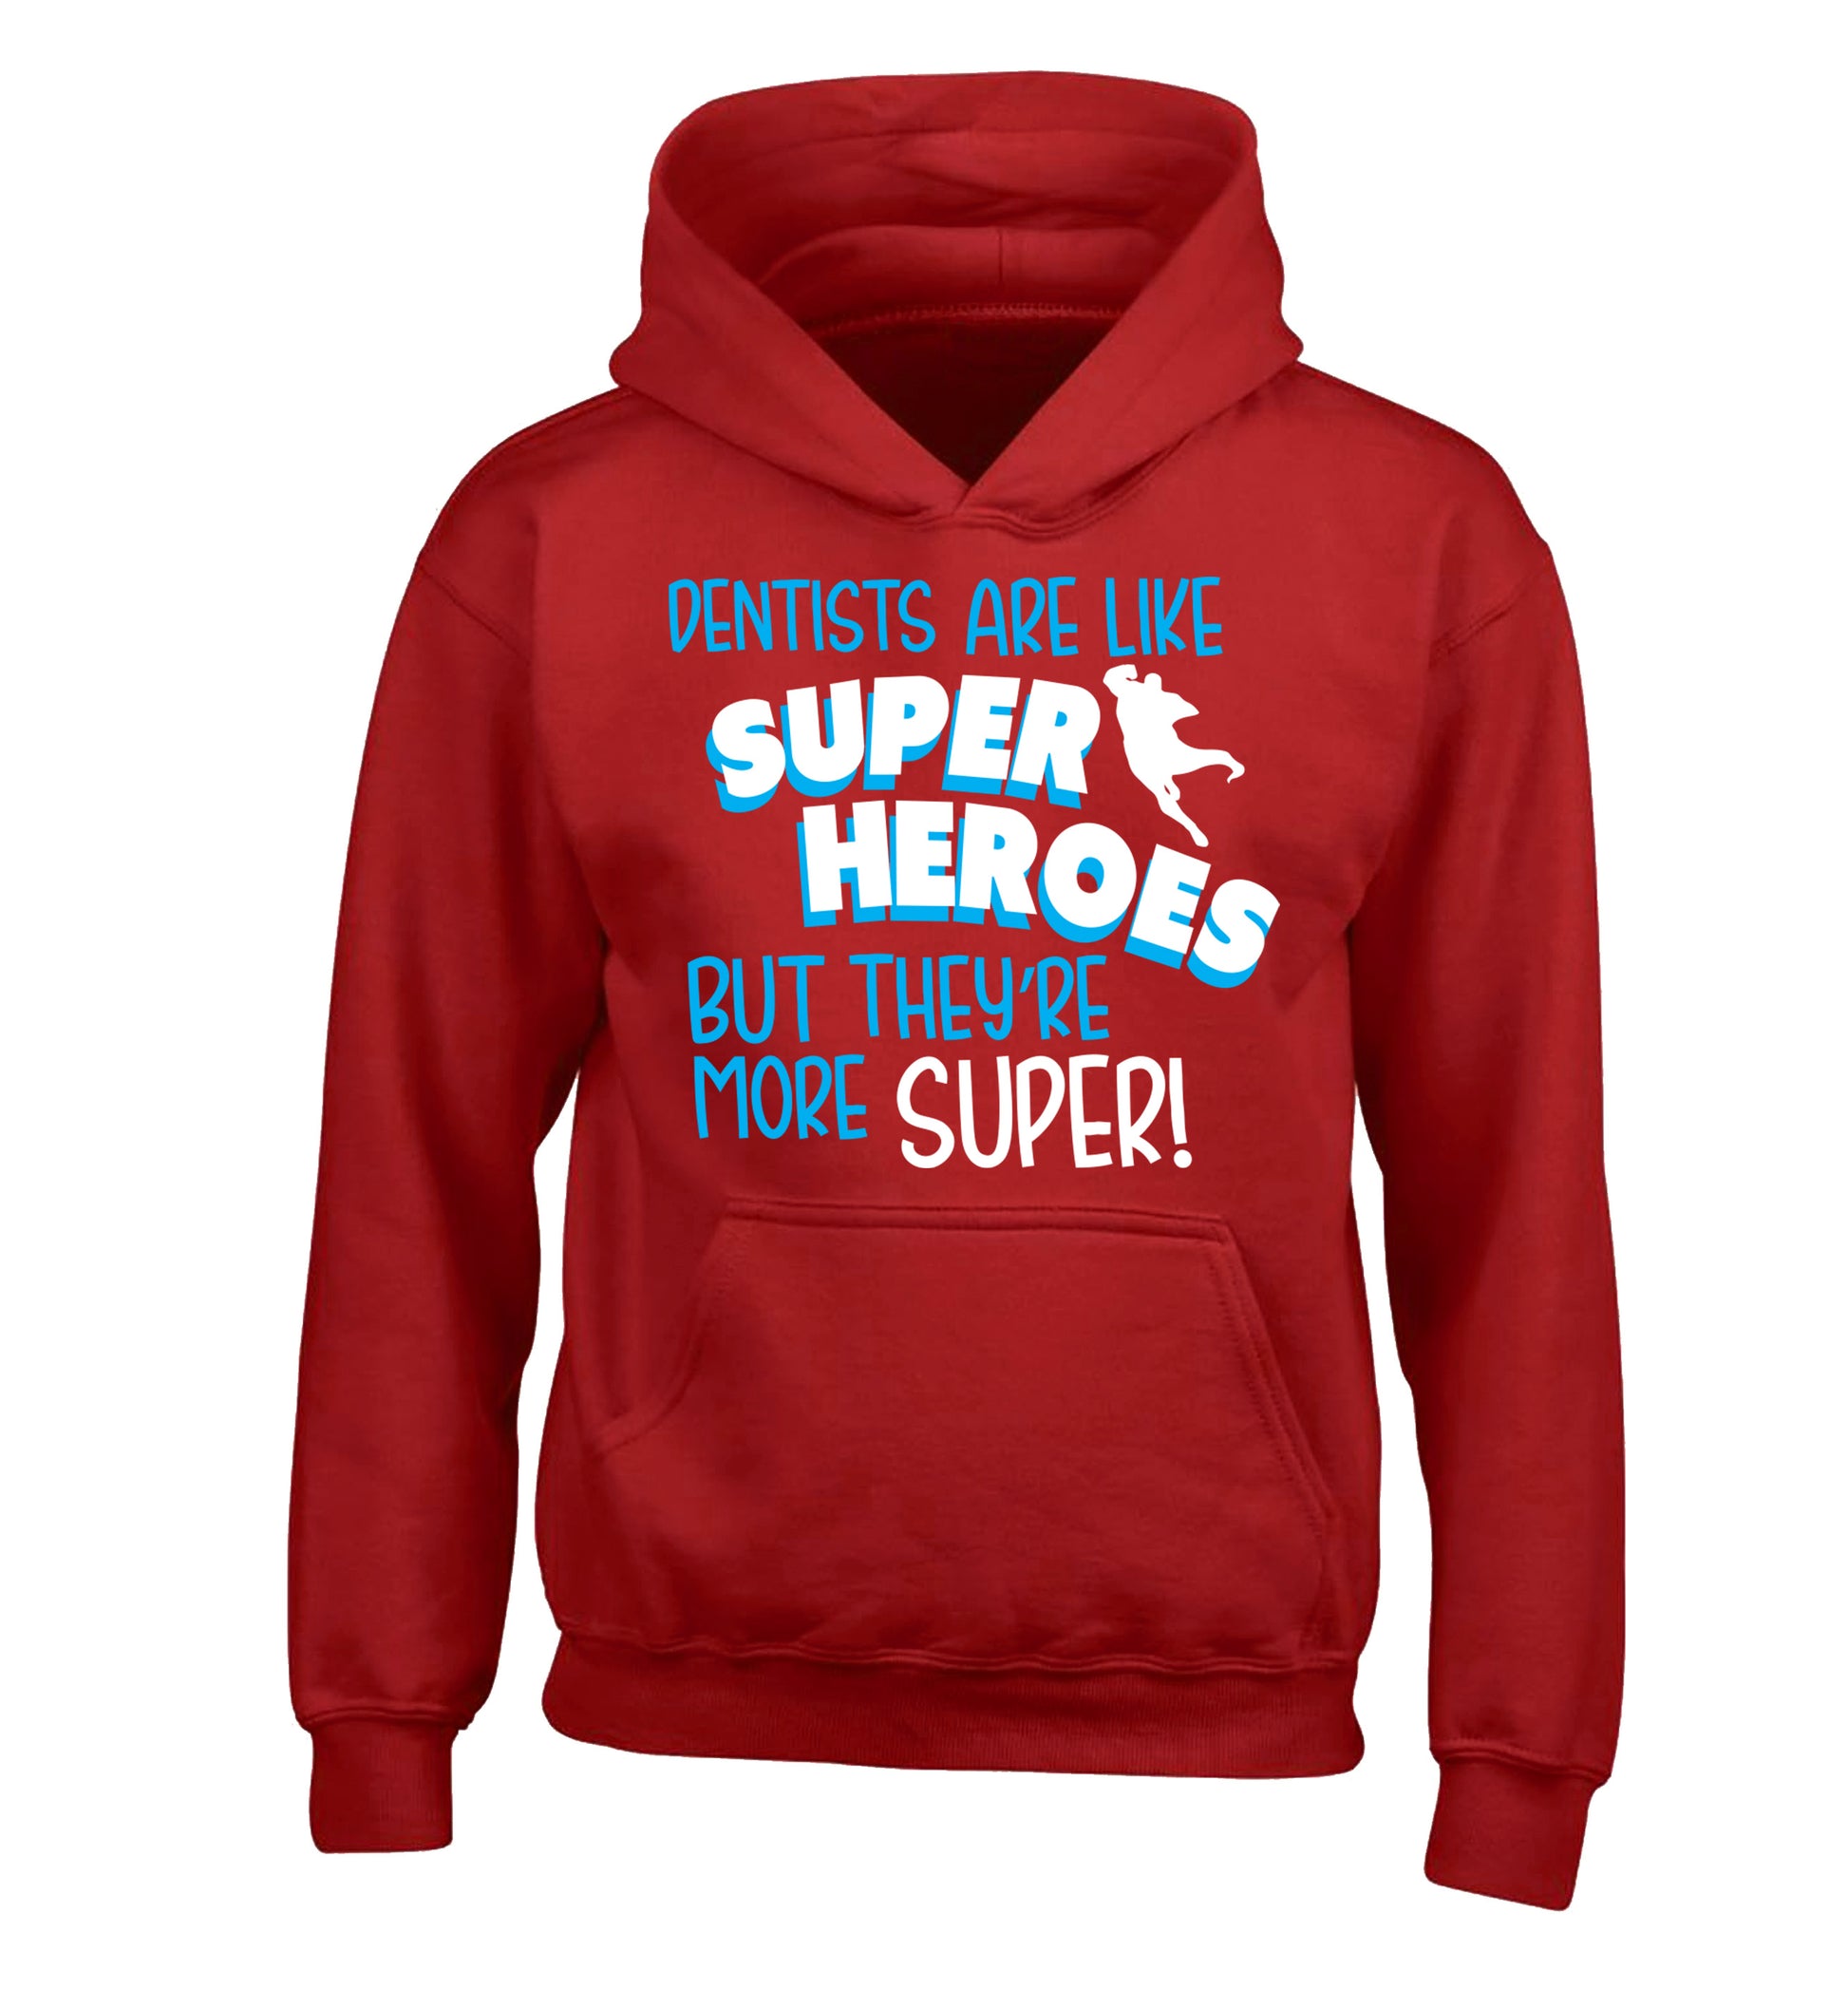 Dentists are like superheros but they're more super children's red hoodie 12-13 Years